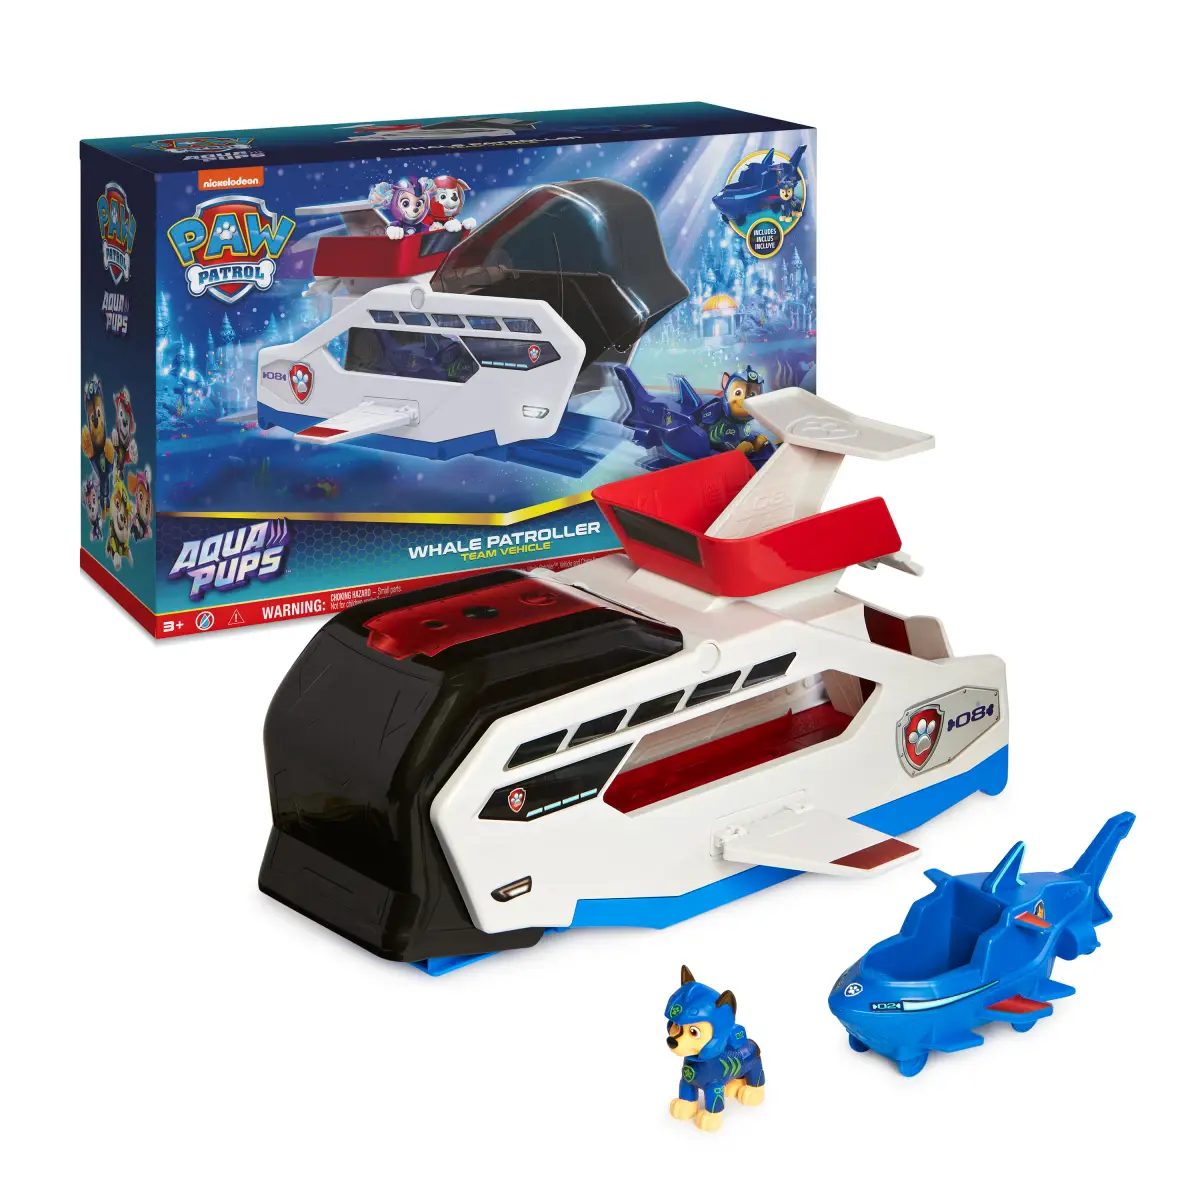 Paw Patrol Aqua Pups Whale Patroller Team Vehicle With Chase Action Figure, Toy Car And Vehicle Launcher, Kids Toys For Ages 3 And Up